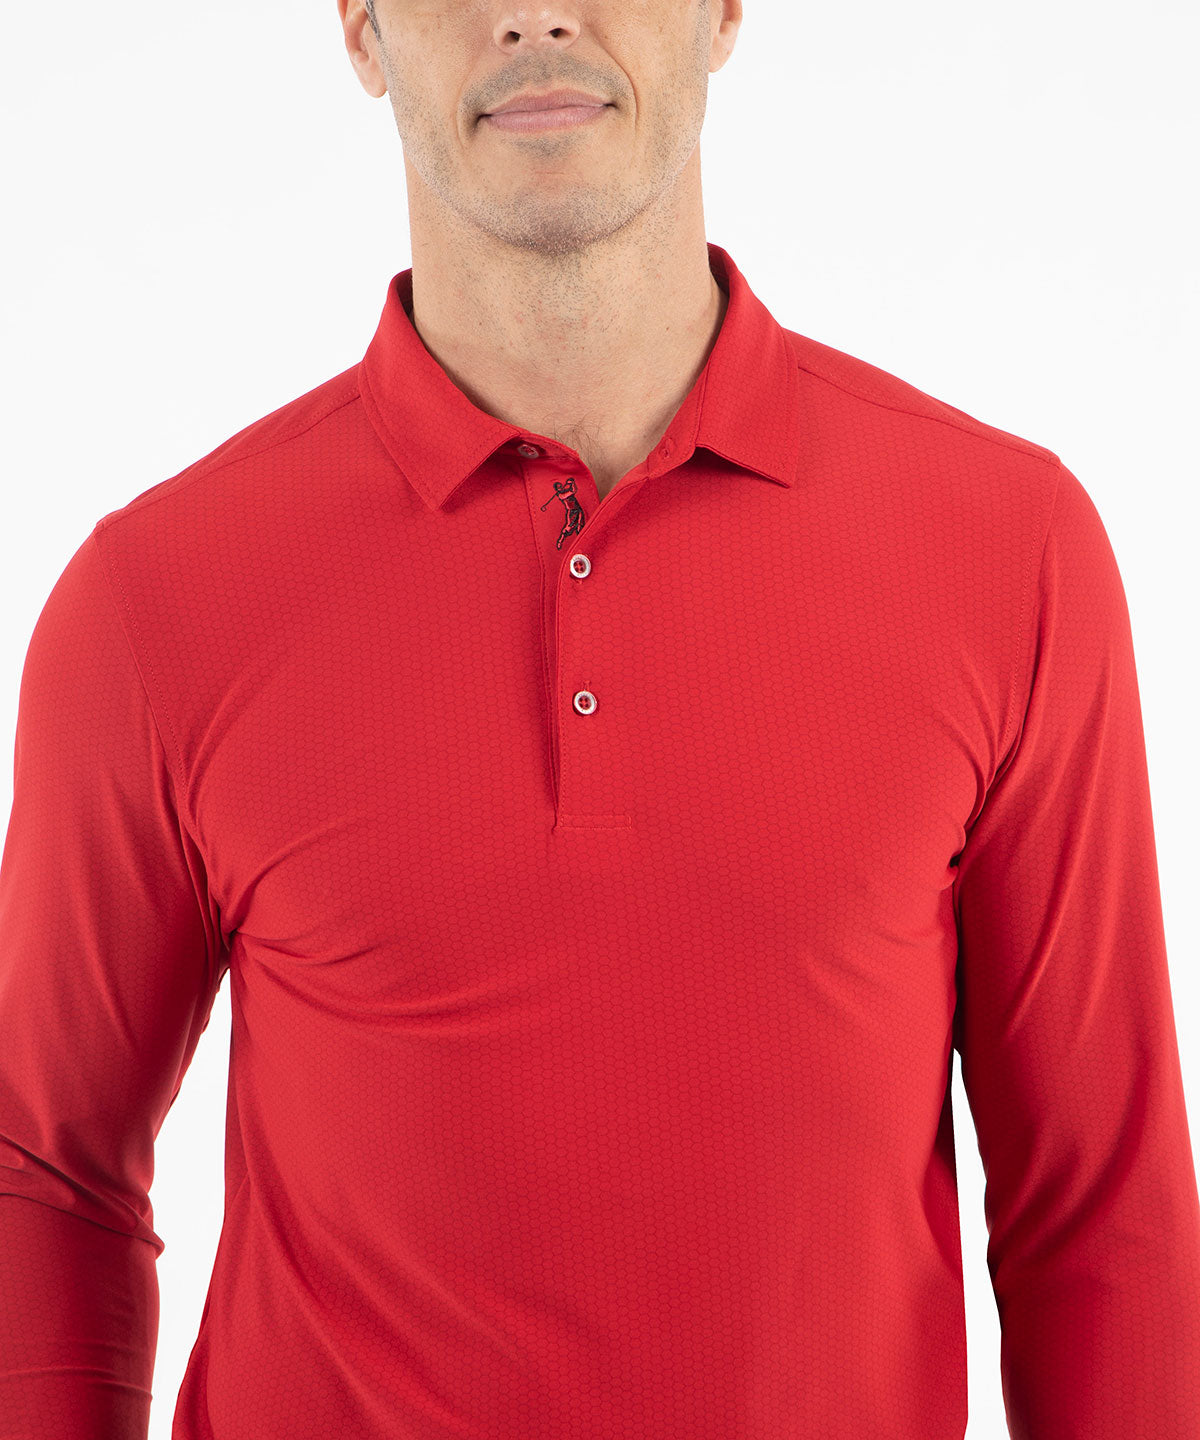 3 Button Polo Shirt (Long Sleeve Performance Stretch / See All Colors)